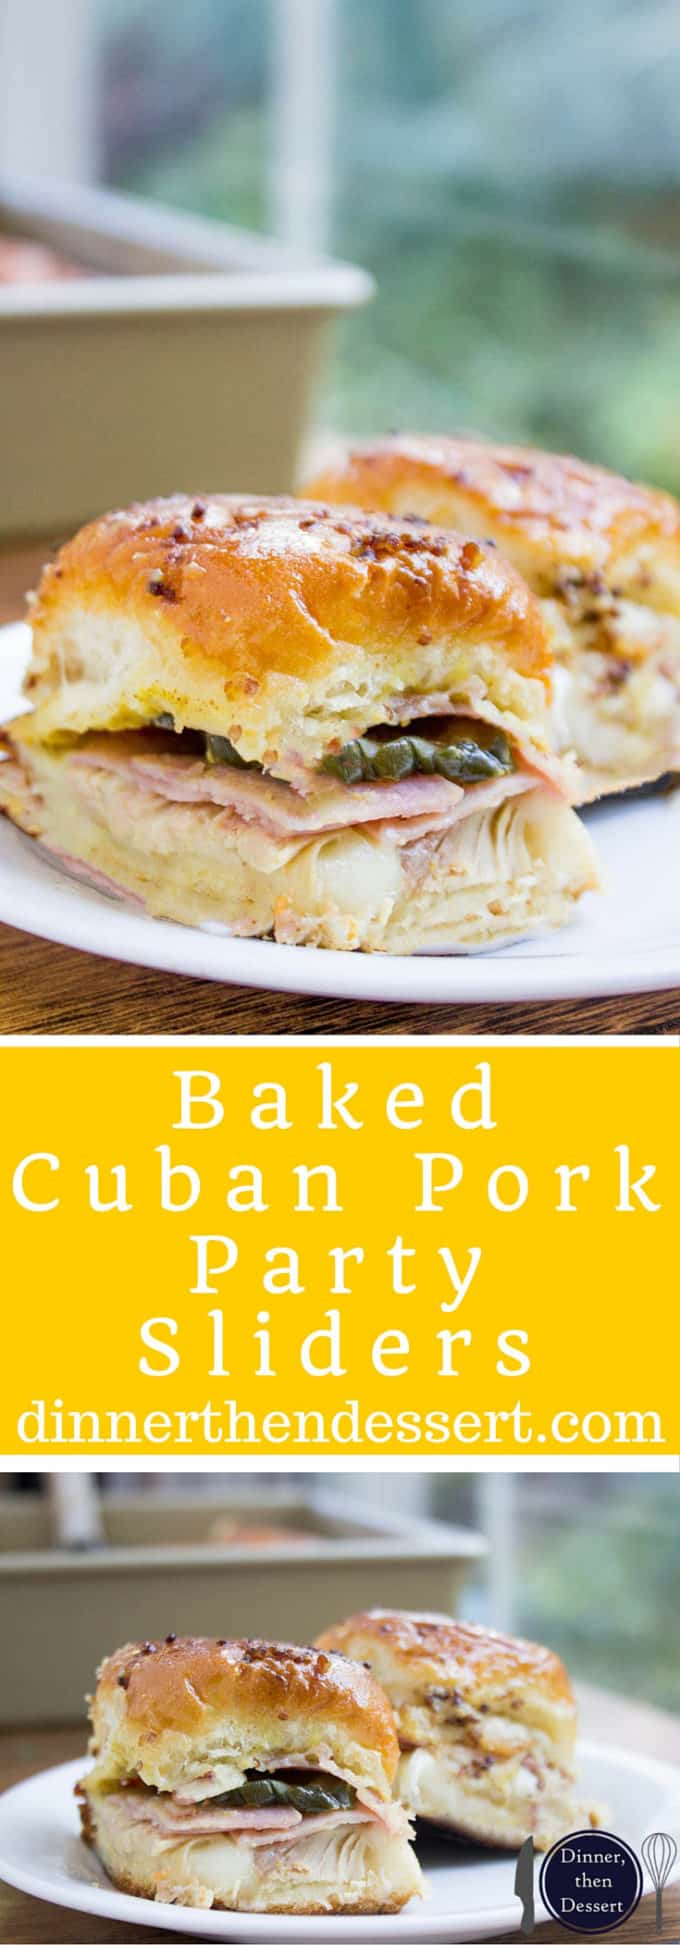 Baked Cuban Pork Party Sliders have pork shoulder, sliced ham, Swiss cheese, pickles, brown mustard and a butter whole grain mustard topping make these party sliders a perfect gameday treat and put the standard ham and cheese versions to shame.